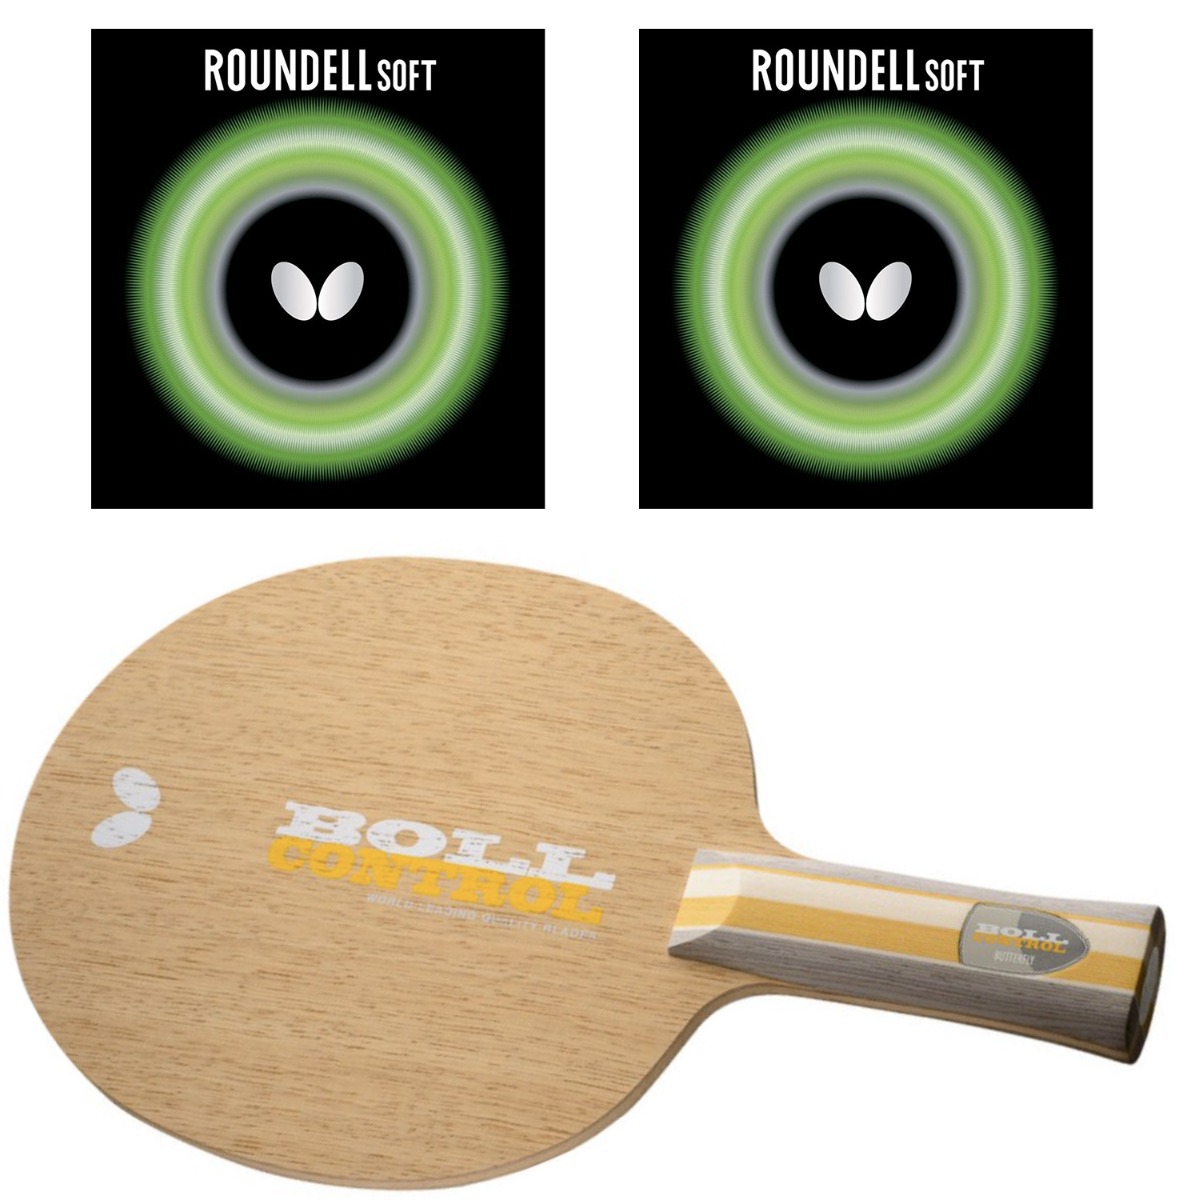 Butterfly Boll Control + Roundell Soft